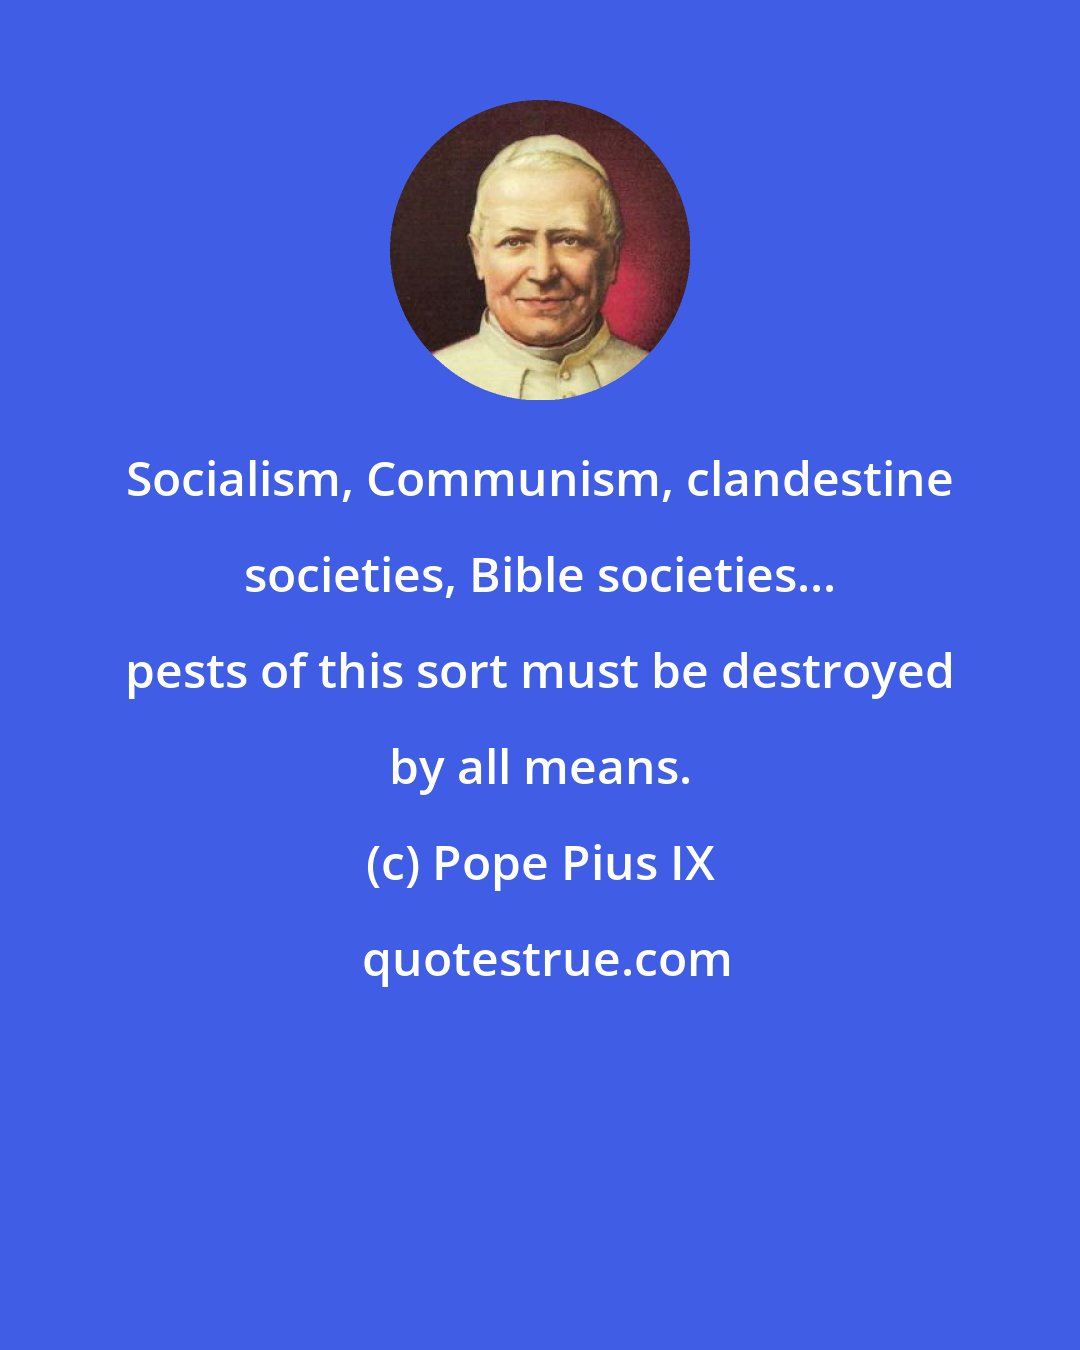 Pope Pius IX: Socialism, Communism, clandestine societies, Bible societies... pests of this sort must be destroyed by all means.